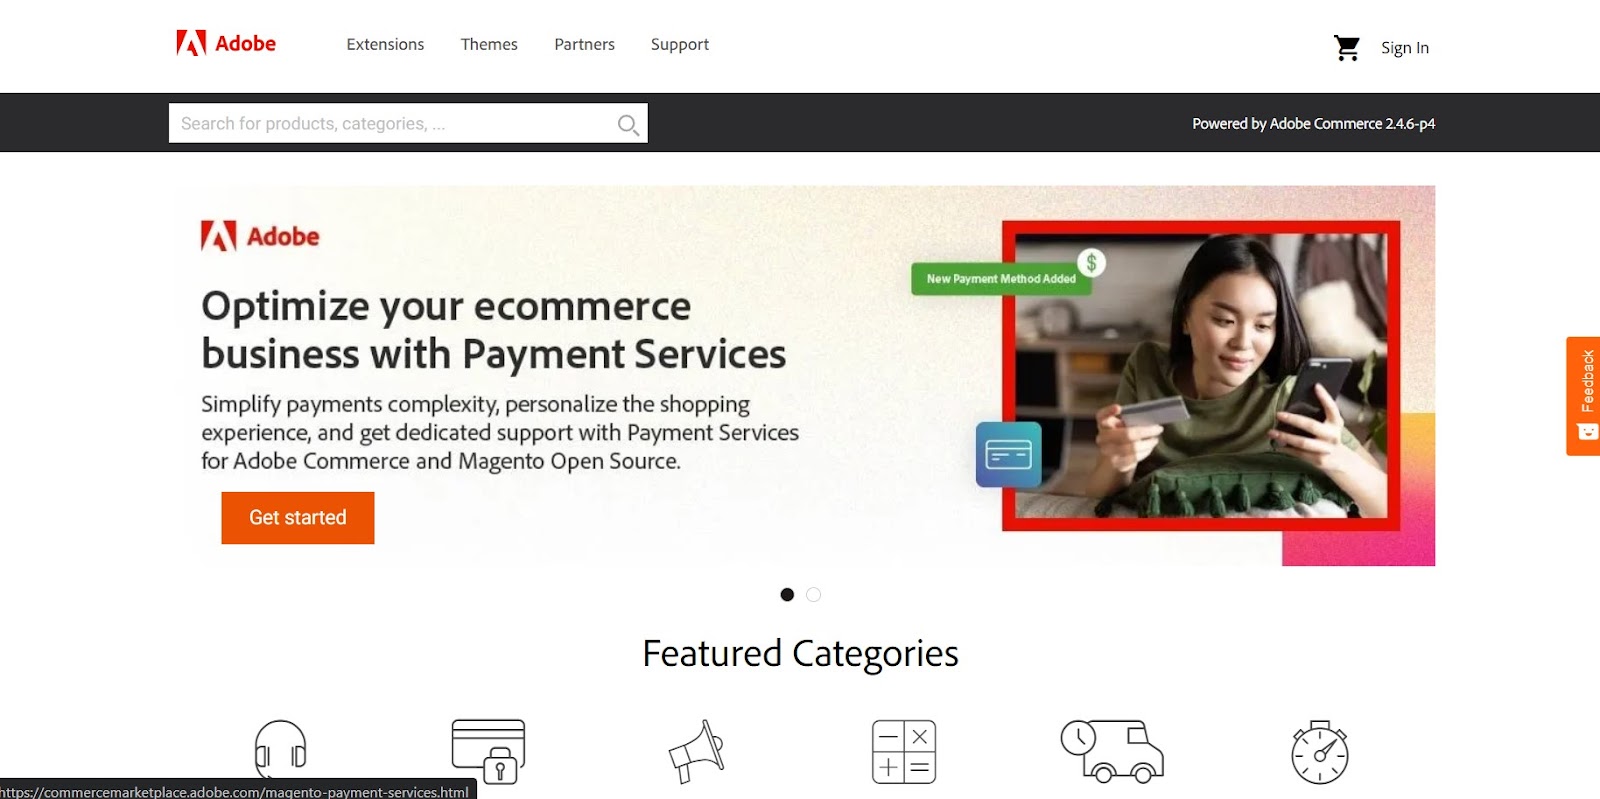 Download on Magento marketplace